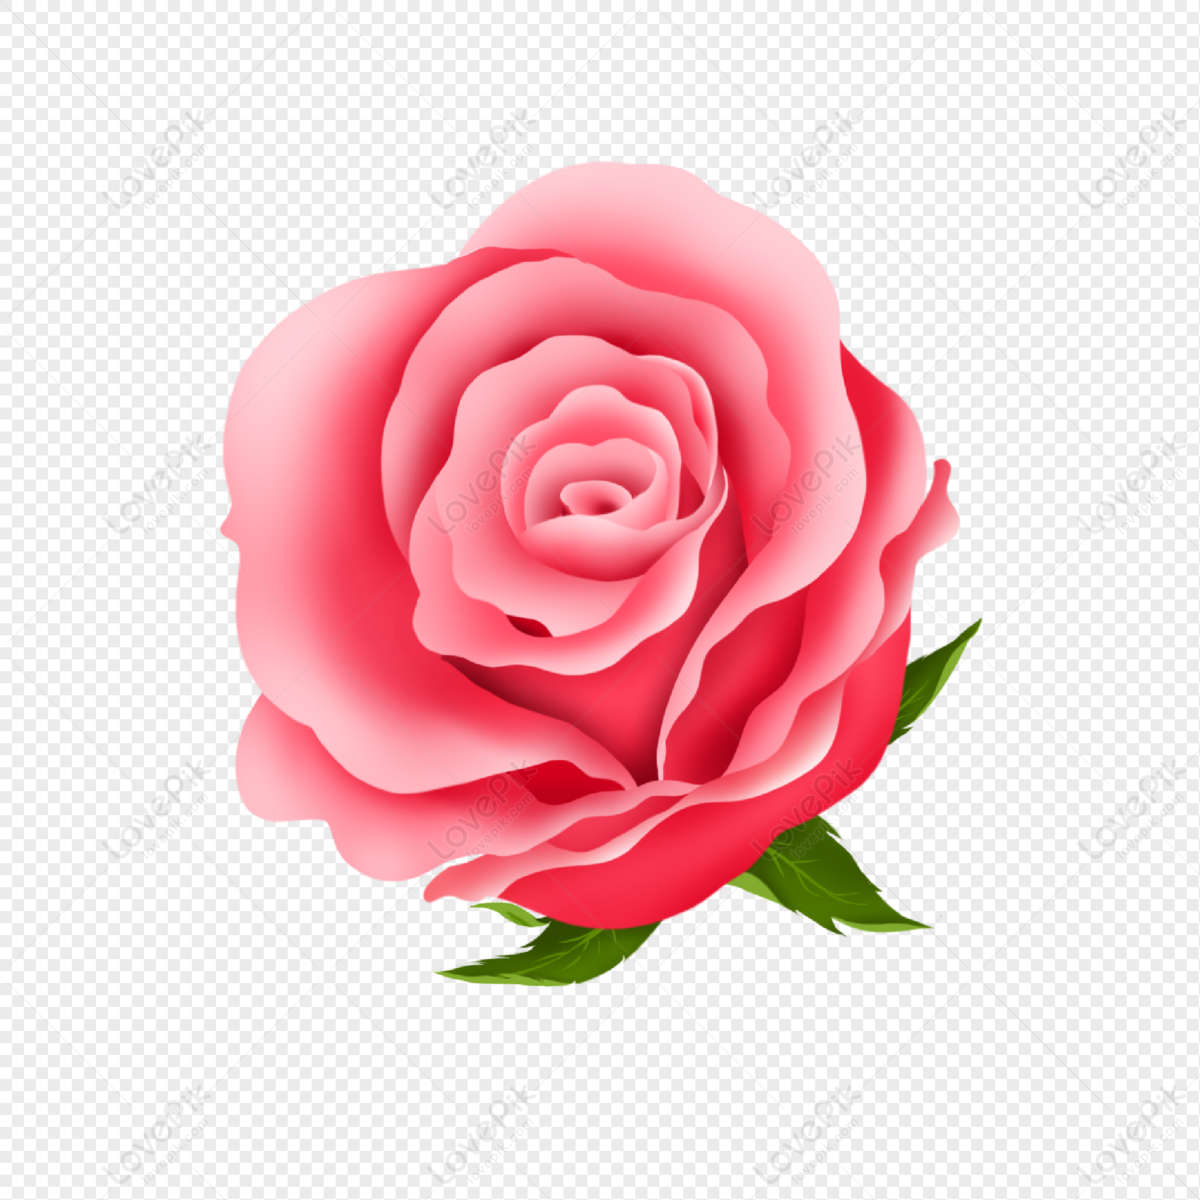 Red Rose With Flowerbed PNG Image Free Download And Clipart Image ...